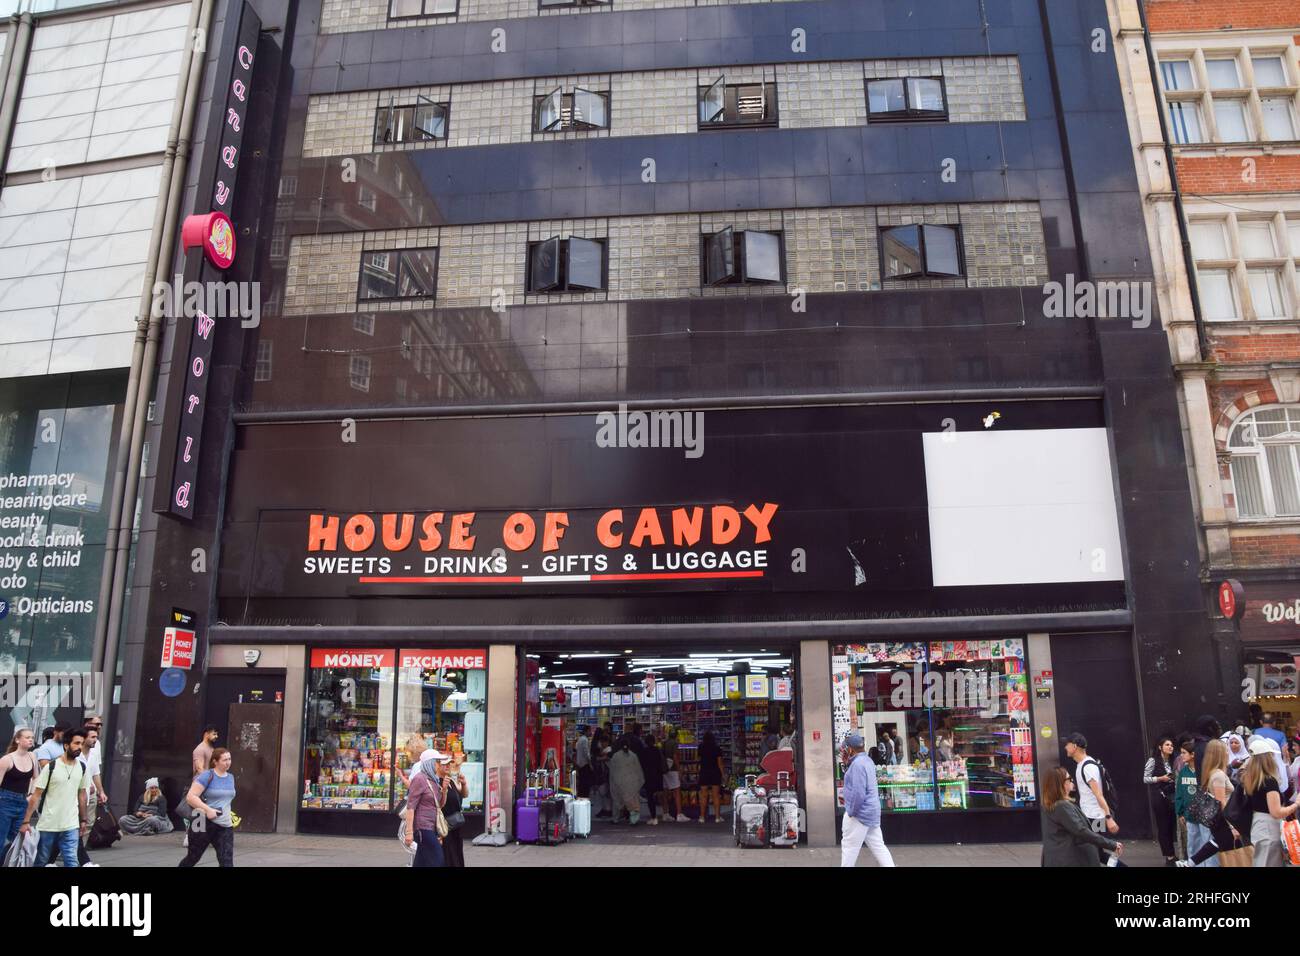 London, UK. 16th August 2023. Exterior view of House of Candy at the former site of the HMV flagship store on Oxford Street. So-called 'American style' candy stores have replaced many shops on Oxford Street as retail leaders warn that high streets are continuing to decline and call for government-backed regeneration. Credit: Vuk Valcic/Alamy Live News Stock Photo